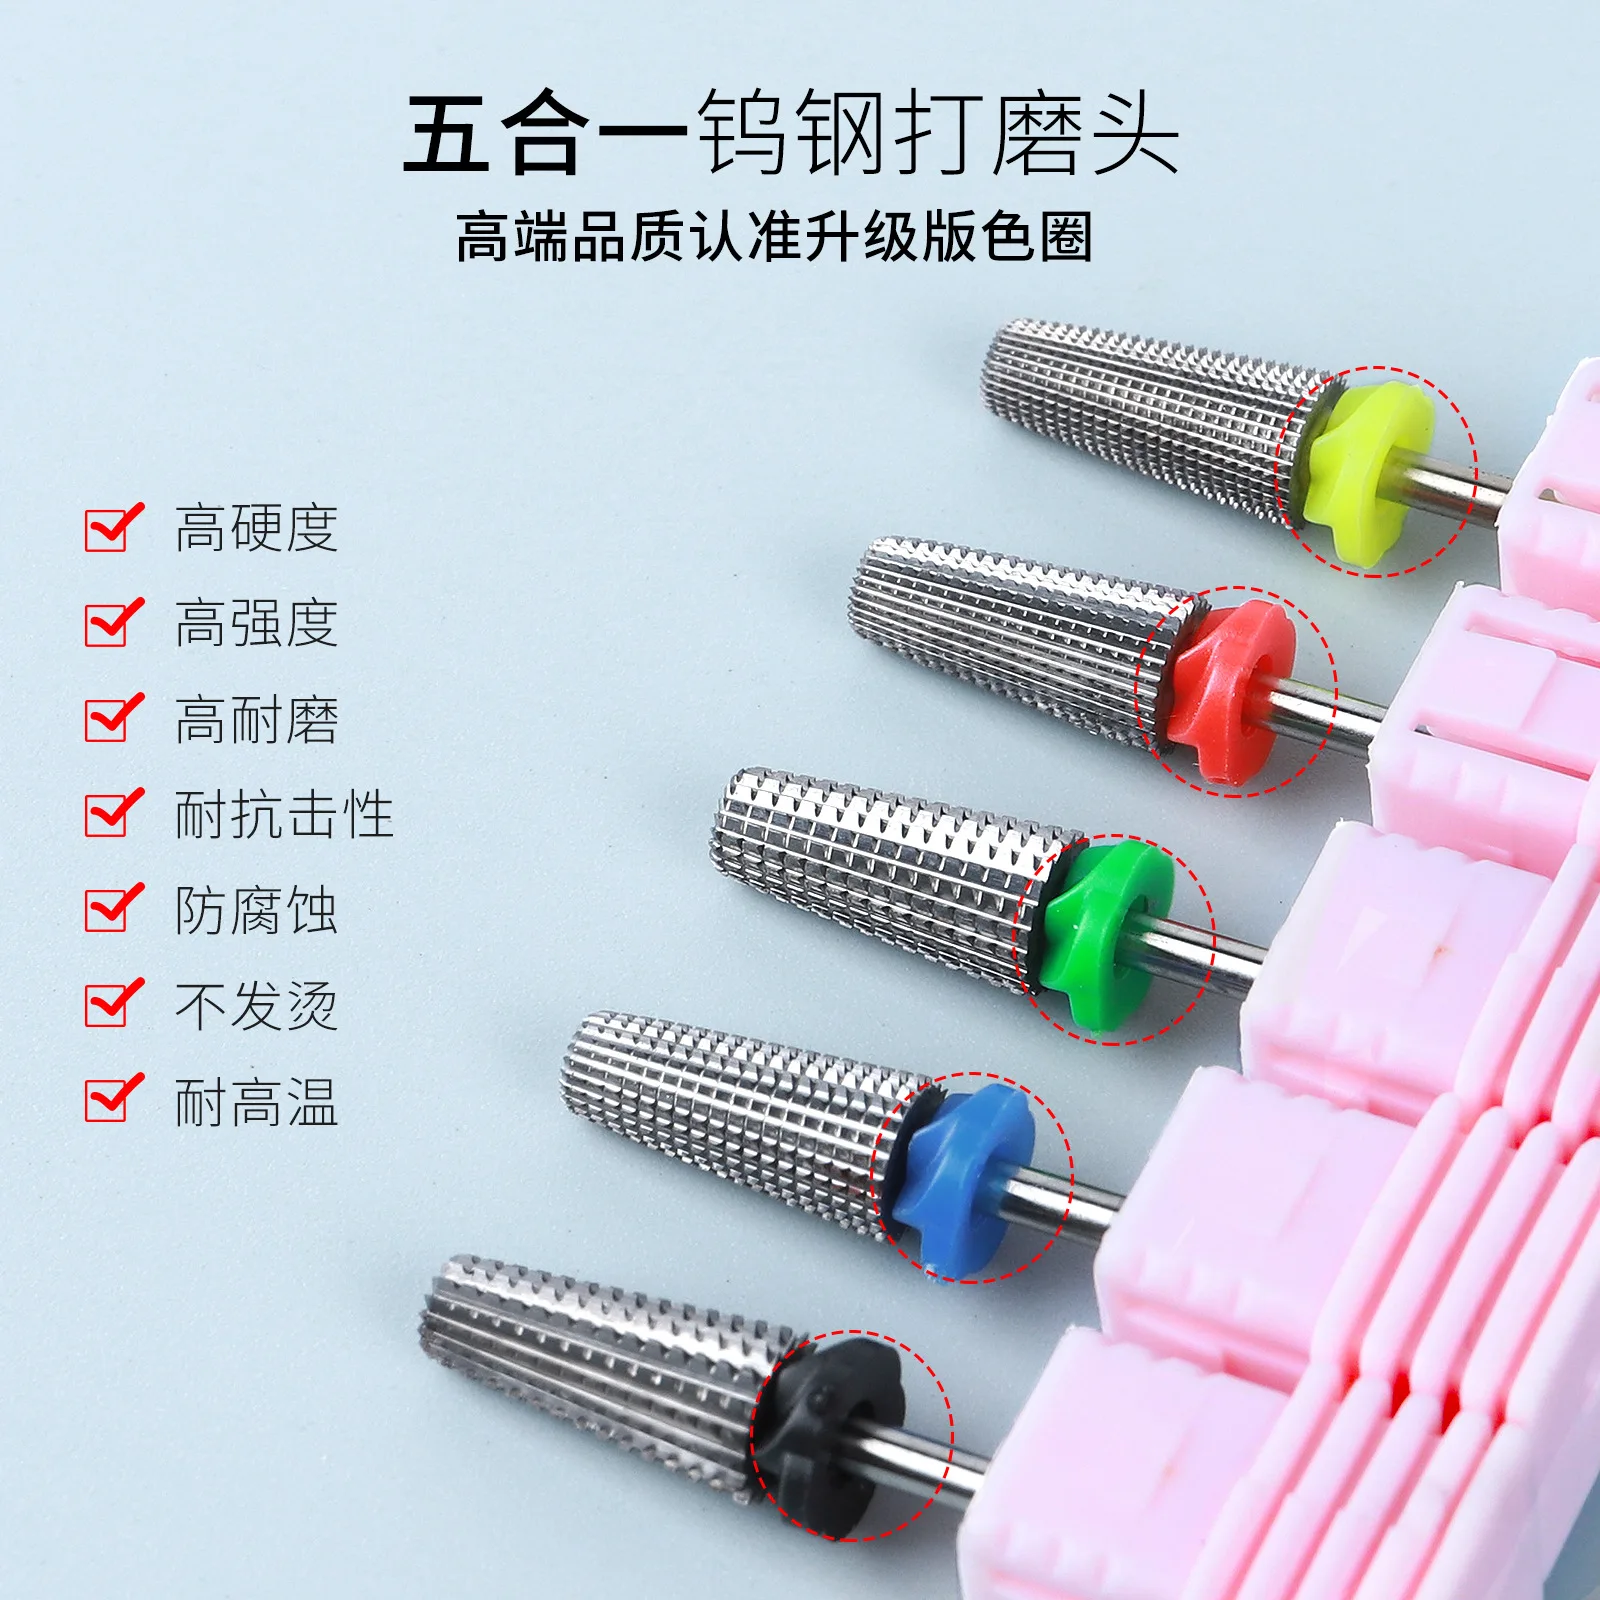 1PCS Boutique 5in1 Tungsen Steel Grinding Head Nail Drill Bit Electric Machine Quick Gel Cuticle Remover Manicure Polishing Tool